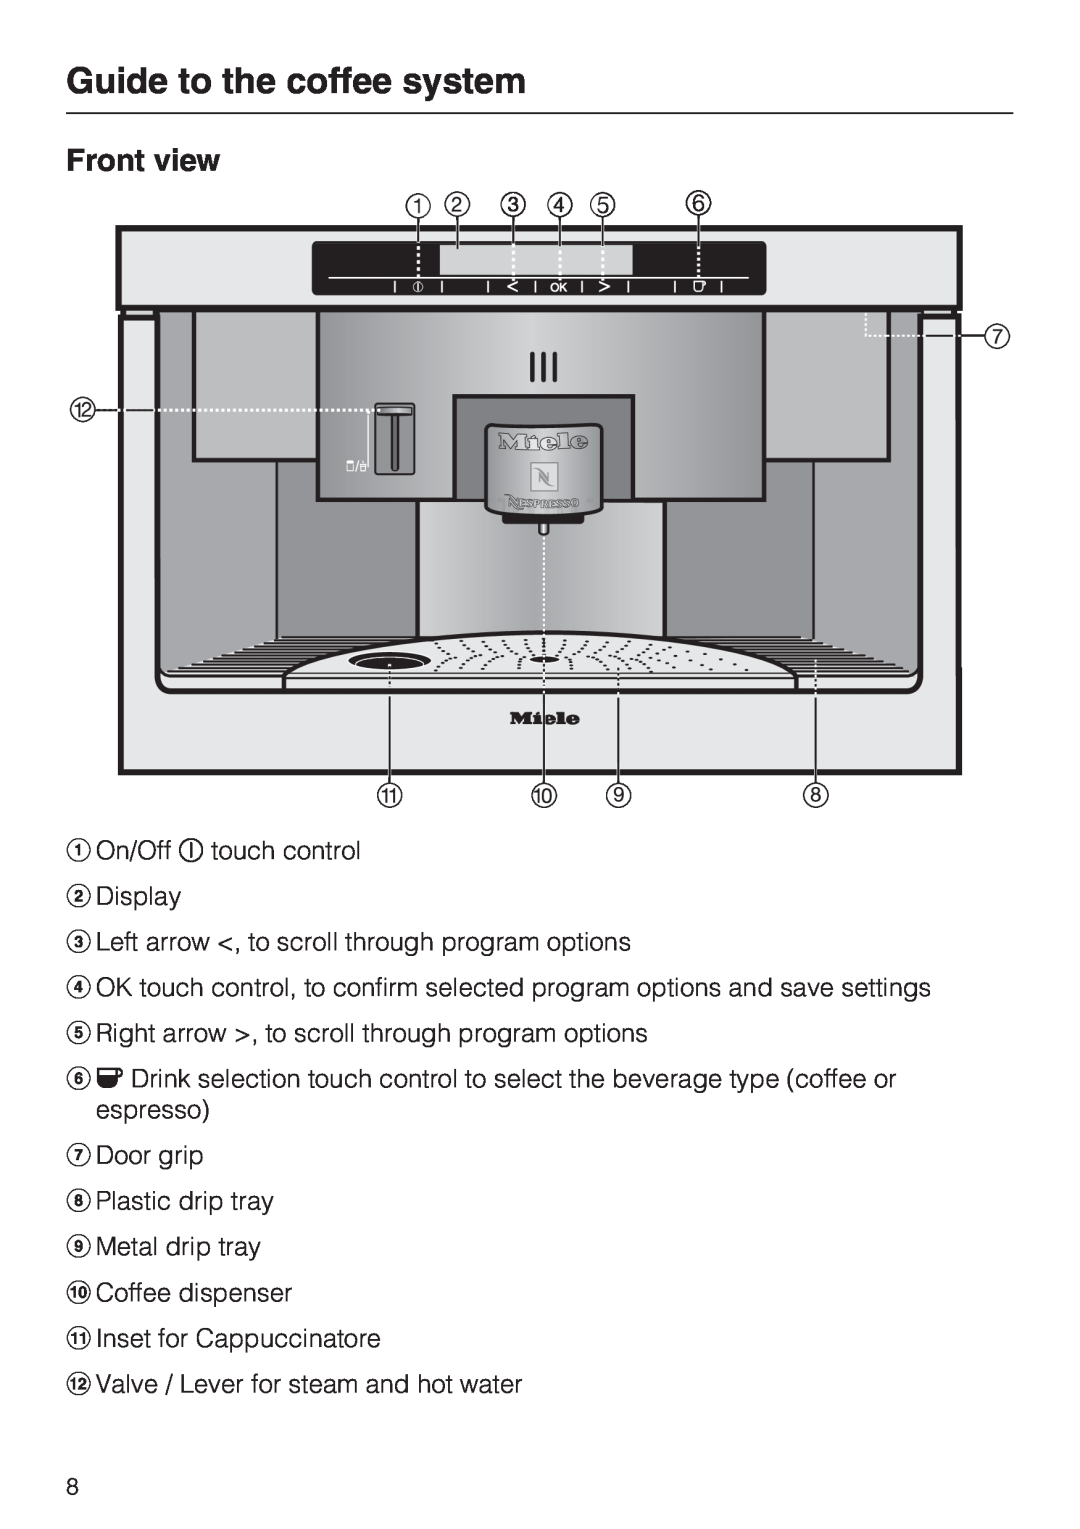 Miele CVA 2652 installation instructions Guide to the coffee system, Front view 